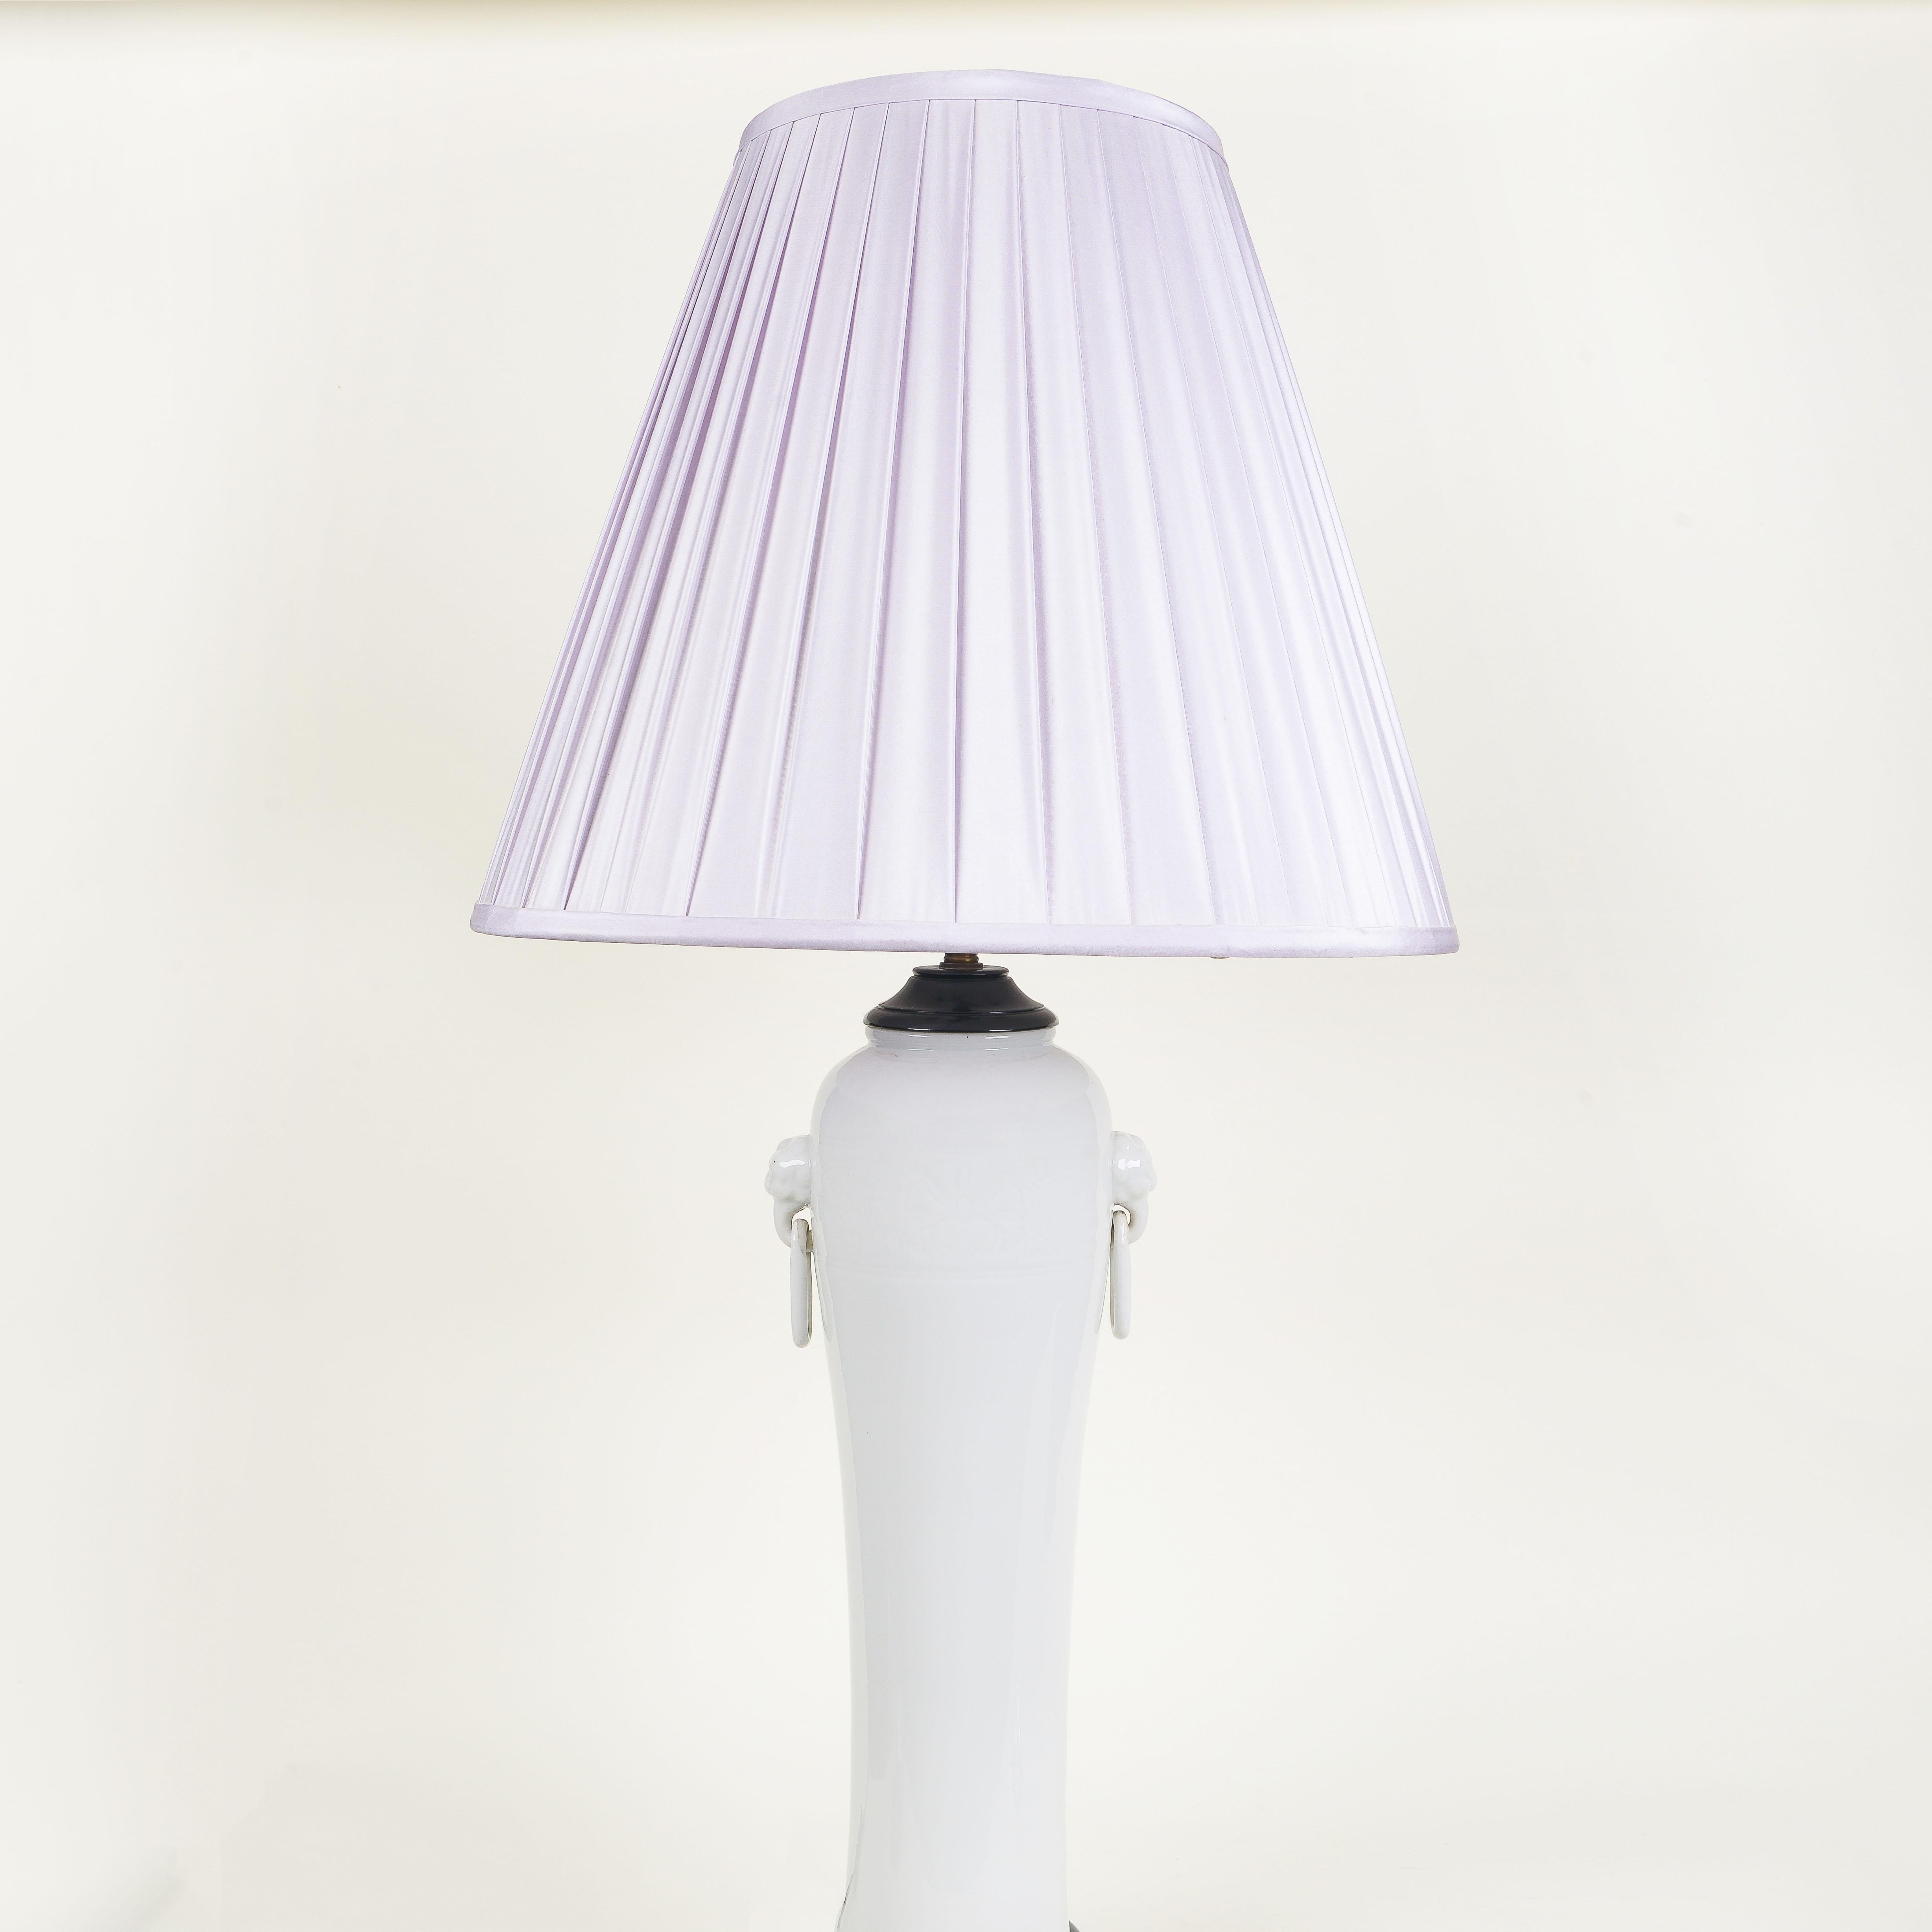 A Pair of Blanc de Chine Porcelain Table Lamps In Good Condition For Sale In New York, NY